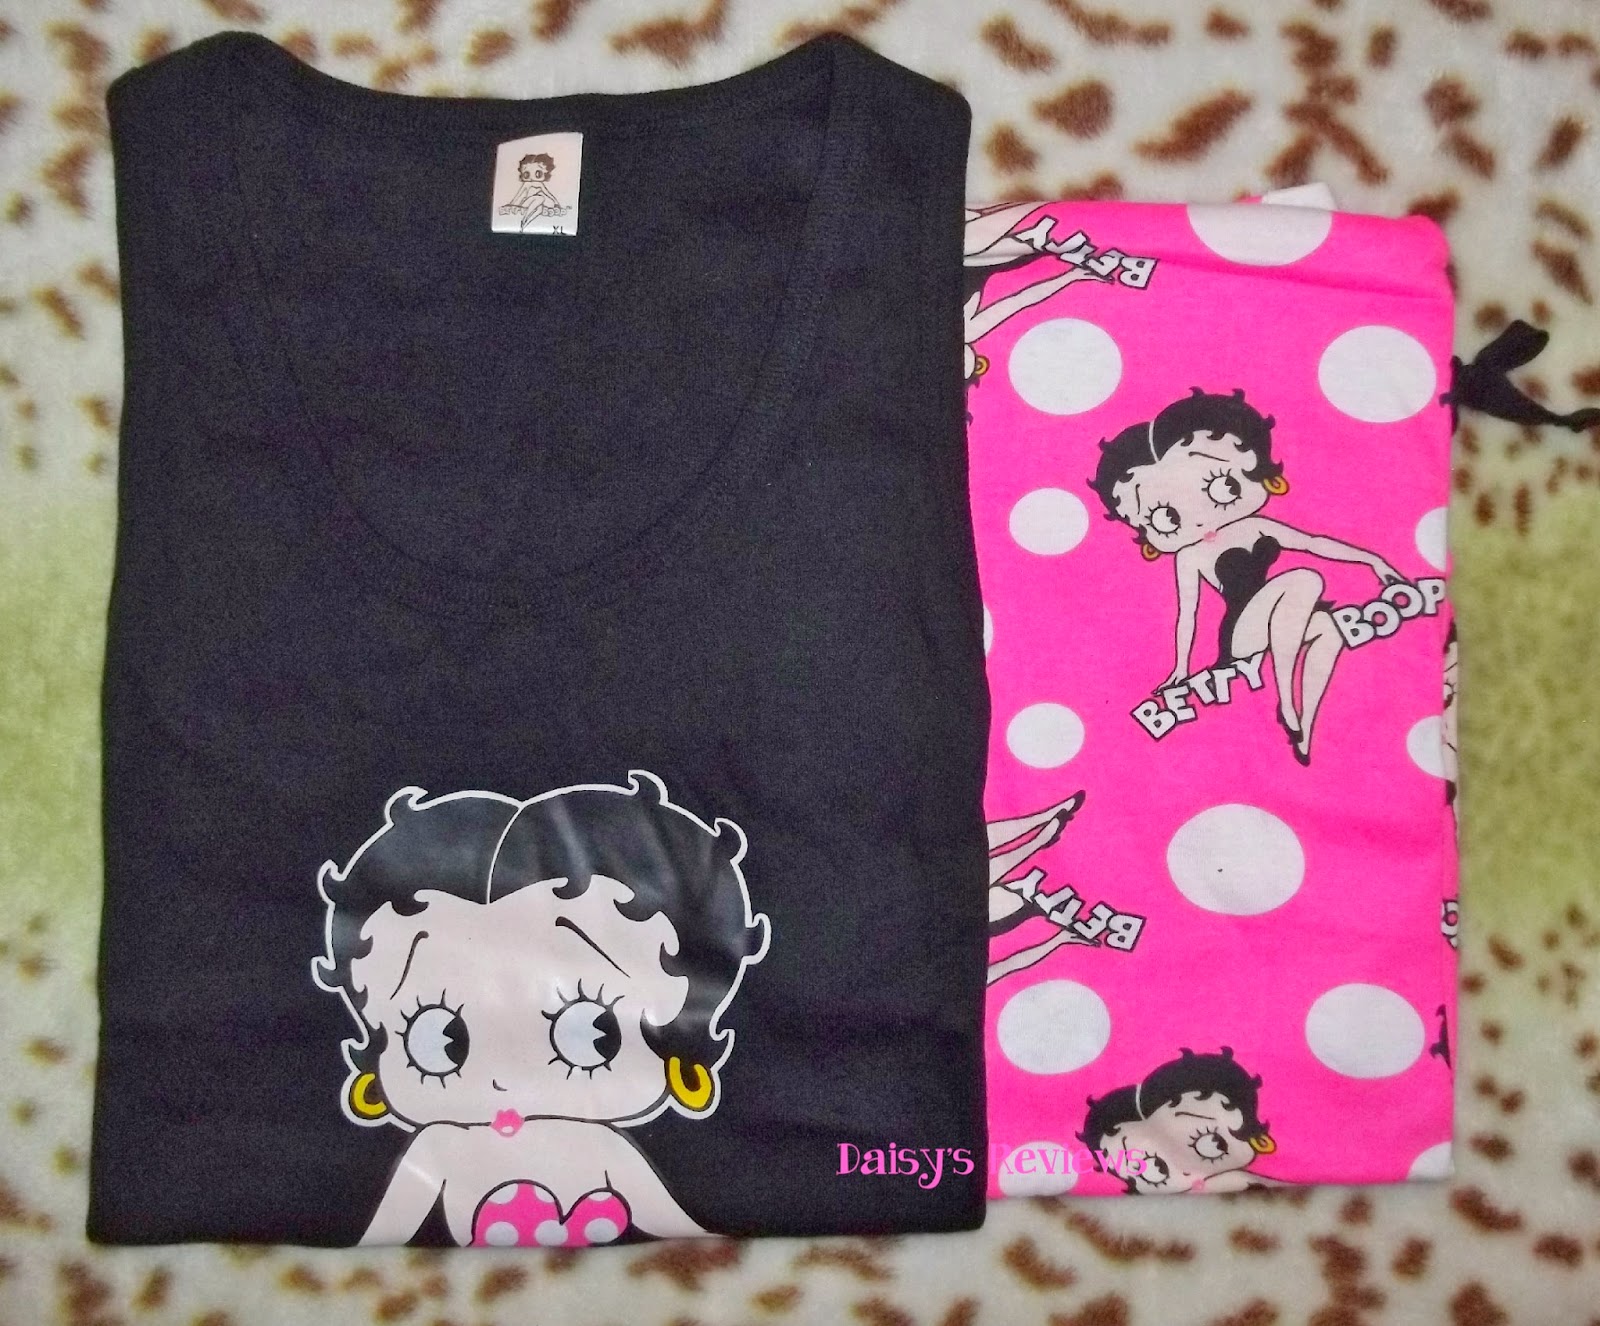 Welcome To Daisy's Reviews: Betty Boop Capri Pajama Set Review